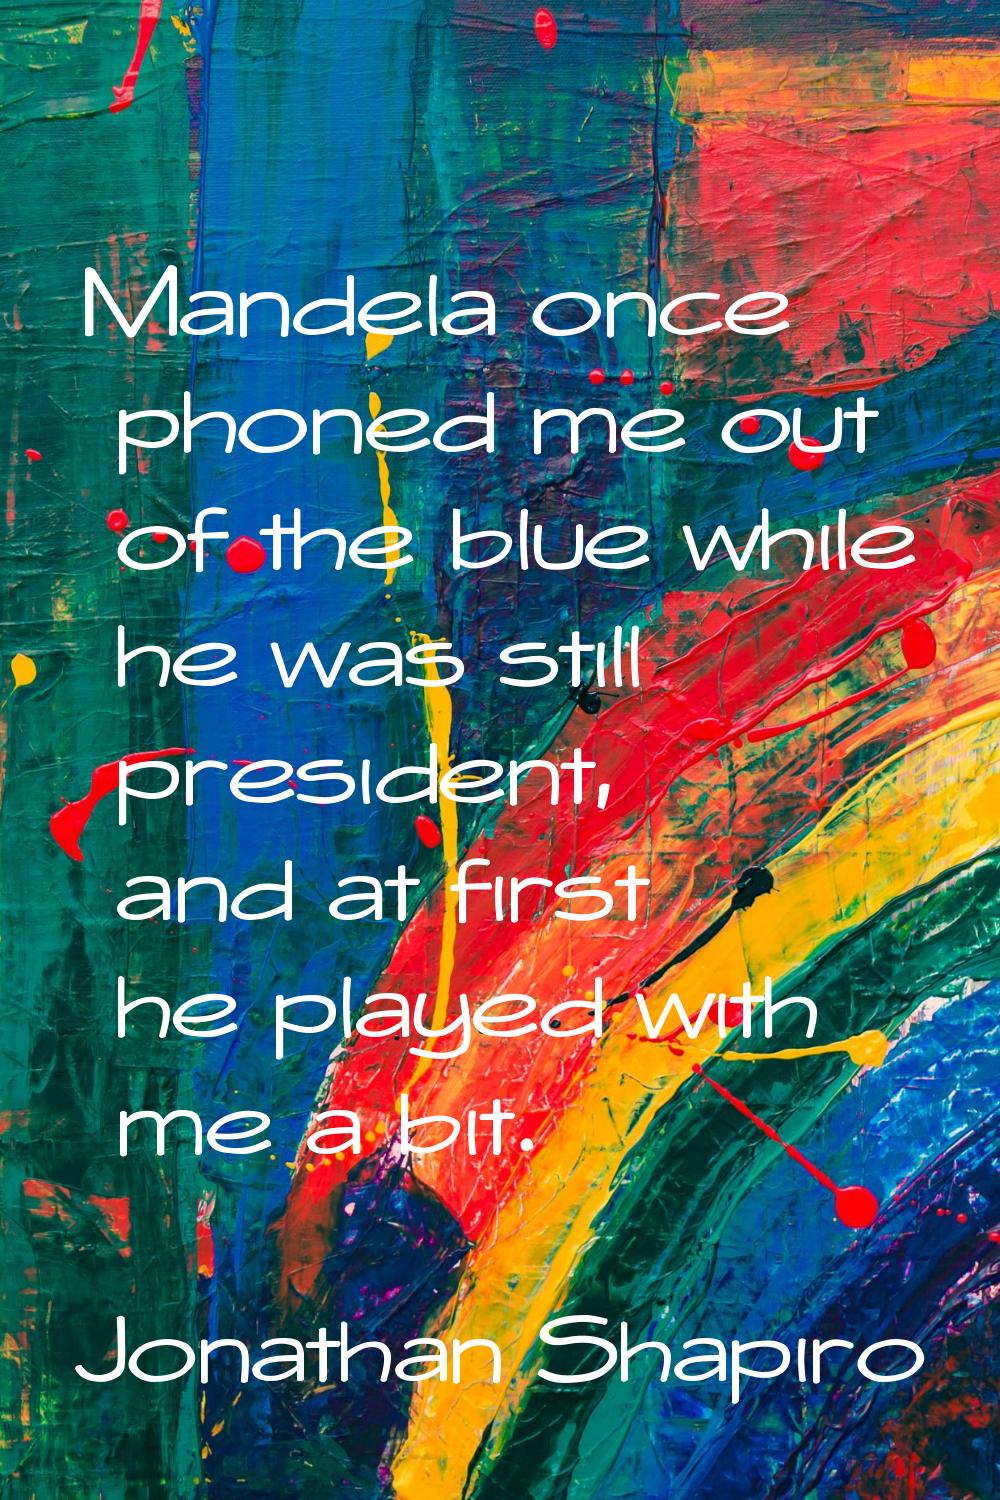 Mandela once phoned me out of the blue while he was still president, and at first he played with me